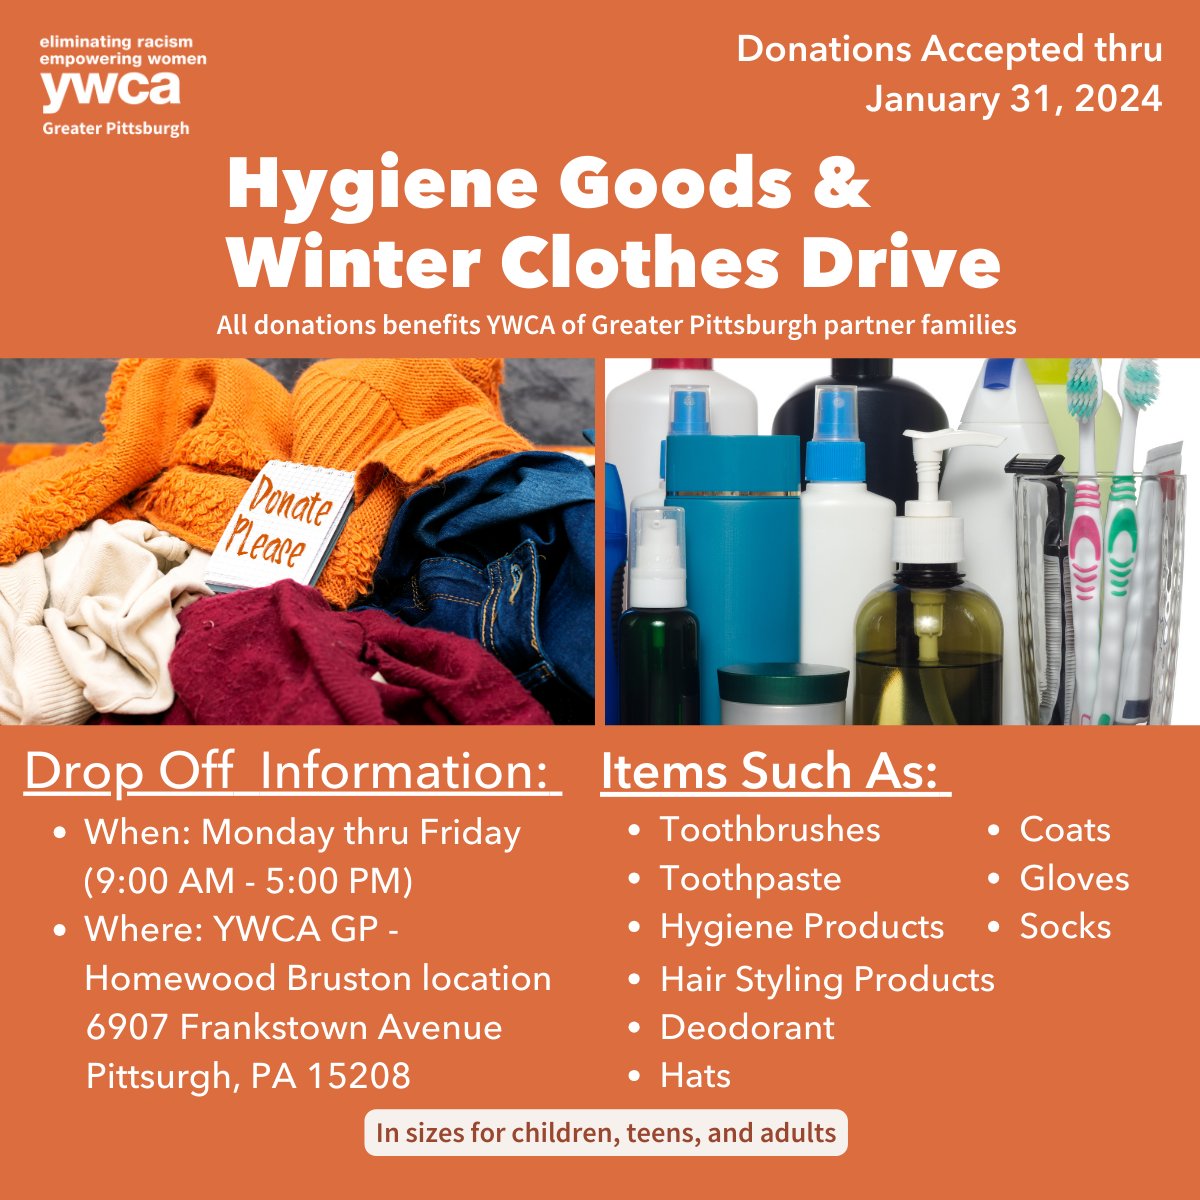 Let's unite as a community to ensure no one in Pittsburgh faces the harsh winter without essentials. Support @ywcapgh Hygiene Goods & Winter Clothes Drive. Every coat, glove, and hygiene item counts. All donations benefit @ywcapgh partner families. Spread the word!